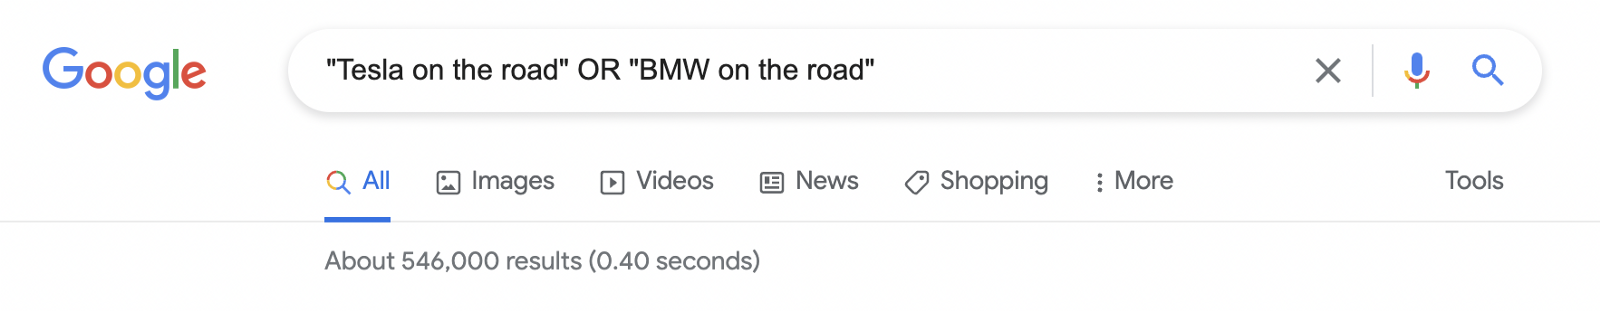 There are results with either “Tesla on the road” or “BMW on the road”